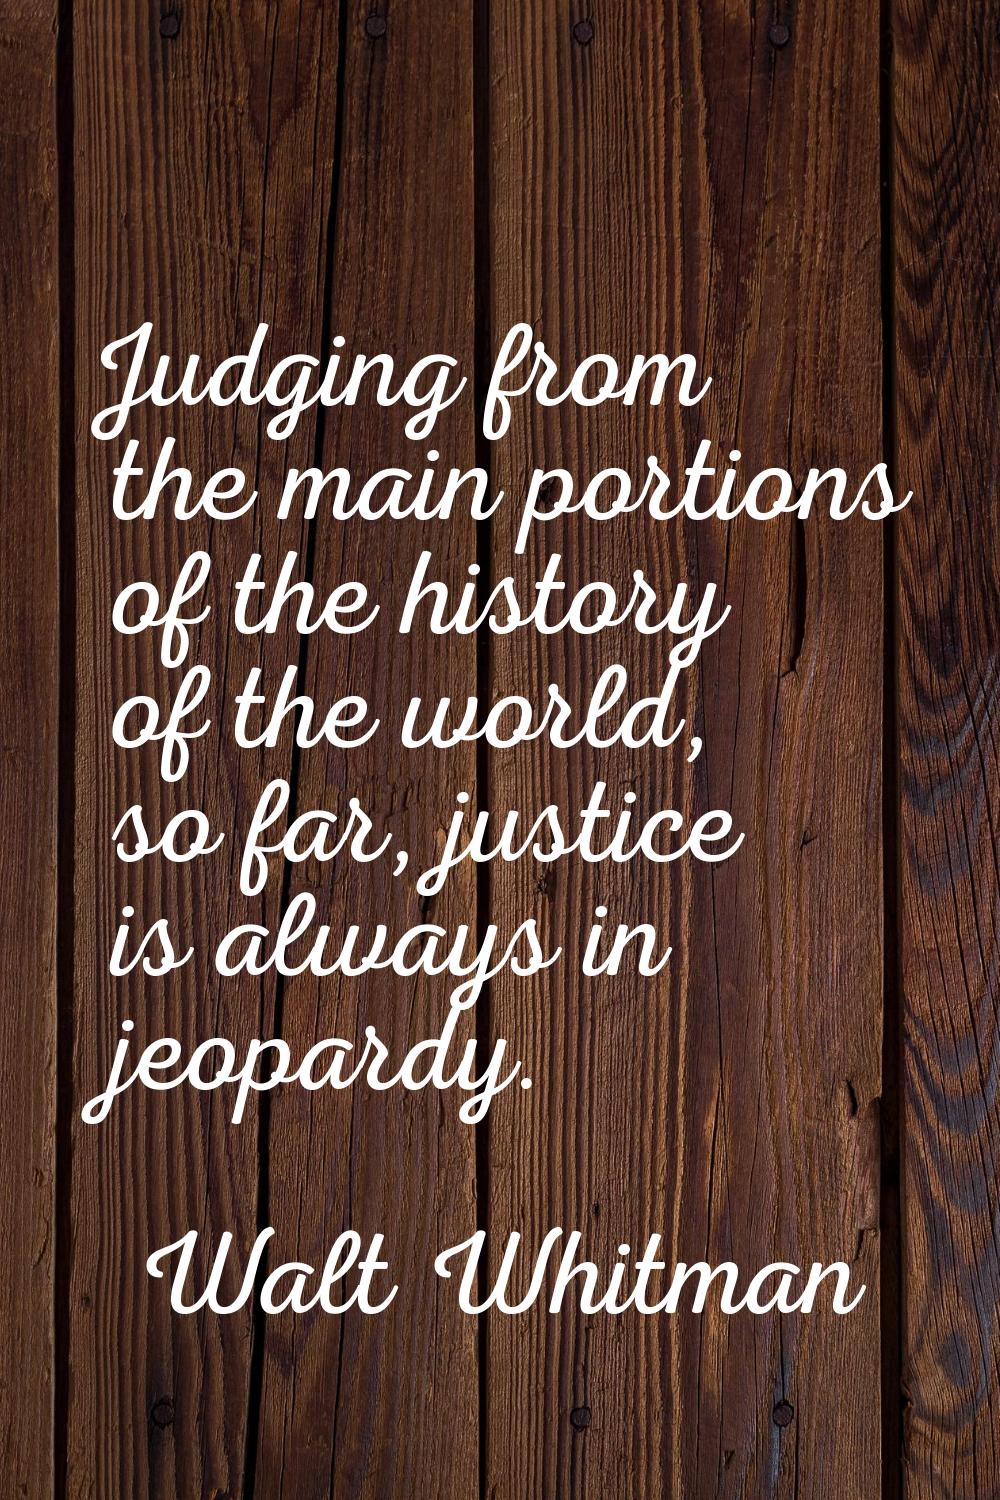 Judging from the main portions of the history of the world, so far, justice is always in jeopardy.